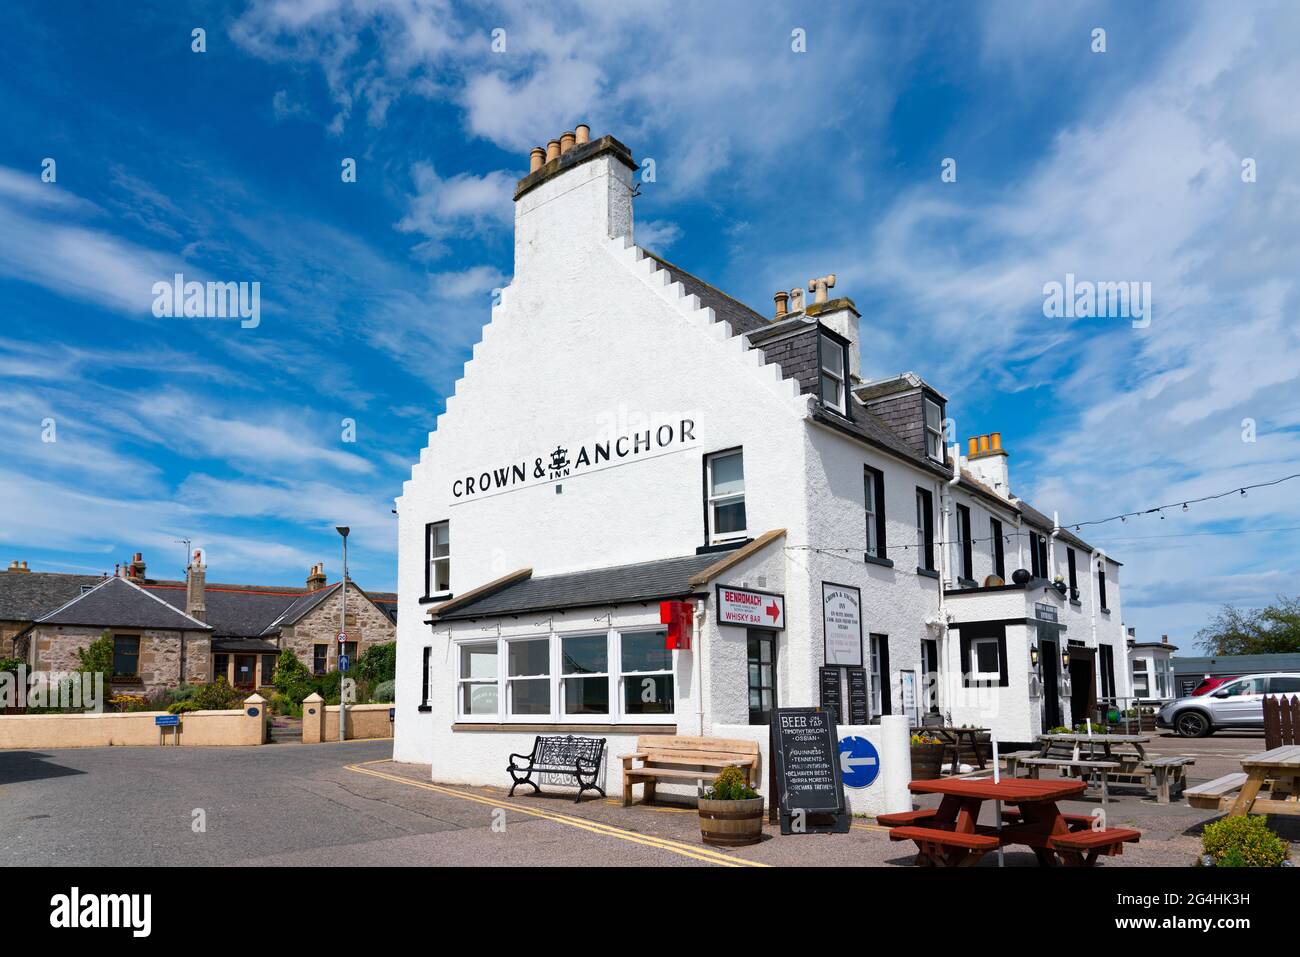 Exterior view of The Crown & Anchor hotel in Findhorn, Moray, Scotland, UK Stock Photo